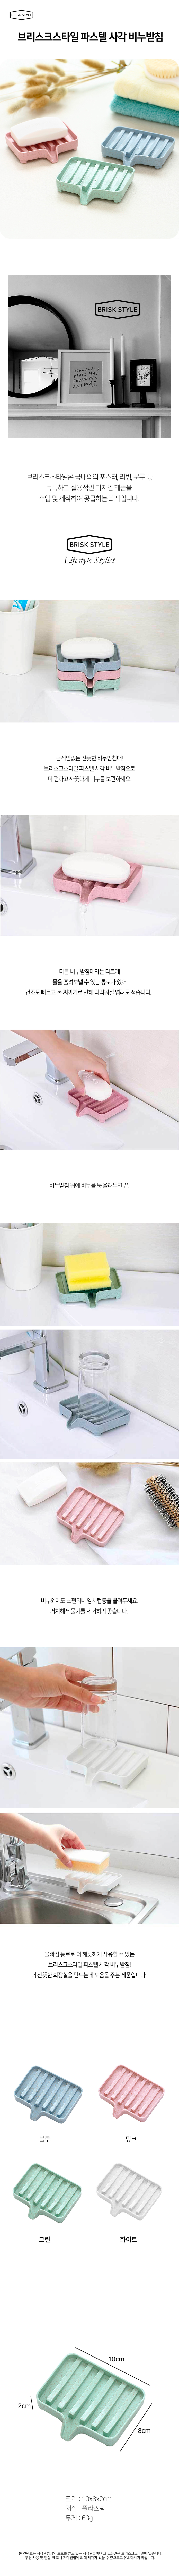 Brisk Style Pastel Square Soap Stand.jpg